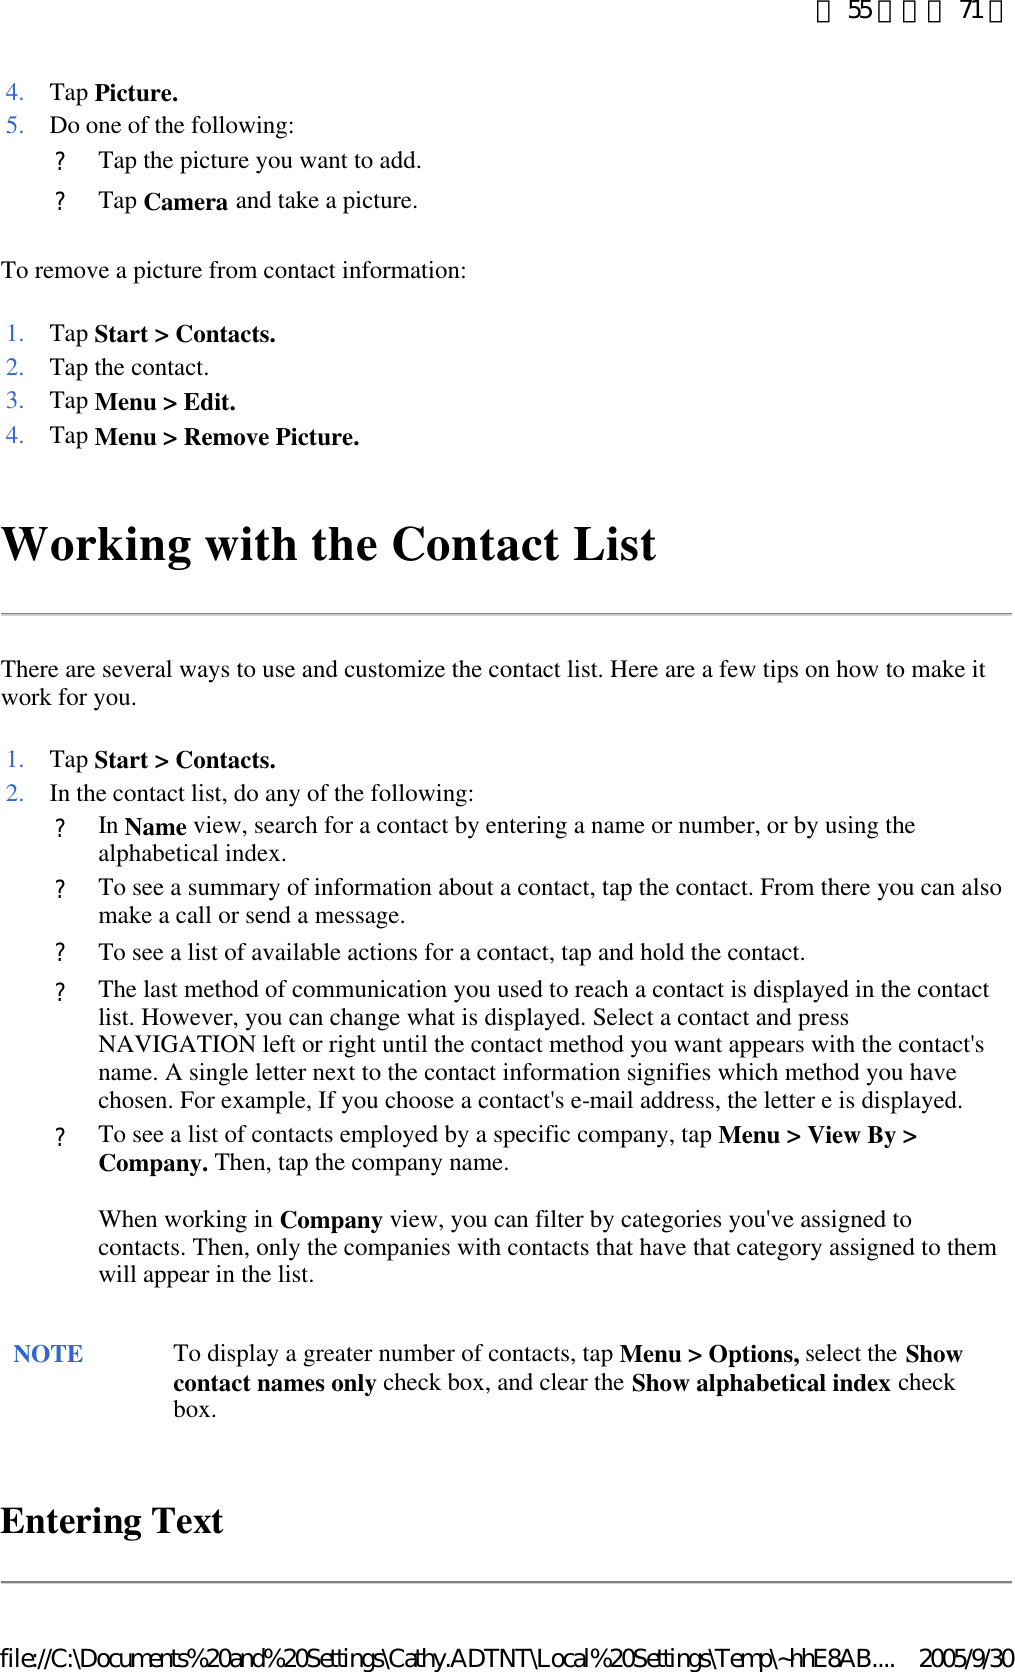 To remove a picture from contact information:  Working with the Contact List There are several ways to use and customize the contact list. Here are a few tips on how to make it work for you. Entering Text 4. Tap Picture.5. Do one of the following: ?Tap the picture you want to add.?Tap Camera and take a picture. 1. Tap Start &gt; Contacts.2. Tap the contact. 3. Tap Menu &gt; Edit.4. Tap Menu &gt; Remove Picture.1. Tap Start &gt; Contacts.2. In the contact list, do any of the following: ?In Name view, search for a contact by entering a name or number, or by using the alphabetical index. ?To see a summary of information about a contact, tap the contact. From there you can also make a call or send a message.?To see a list of available actions for a contact, tap and hold the contact.?The last method of communication you used to reach a contact is displayed in the contact list. However, you can change what is displayed. Select a contact and press NAVIGATION left or right until the contact method you want appears with the contact&apos;s name. A single letter next to the contact information signifies which method you have chosen. For example, If you choose a contact&apos;s e-mail address, the letter e is displayed. ?To see a list of contacts employed by a specific company, tap Menu &gt; View By &gt; Company. Then, tap the company name. When working in Company view, you can filter by categories you&apos;ve assigned to contacts. Then, only the companies with contacts that have that category assigned to them will appear in the list.  NOTE To display a greater number of contacts, tap Menu &gt; Options, select the Show contact names only check box, and clear the Show alphabetical index check box.  第 55 頁，共 71 頁2005/9/30file://C:\Documents%20and%20Settings\Cathy.ADTNT\Local%20Settings\Temp\~hhE8AB....